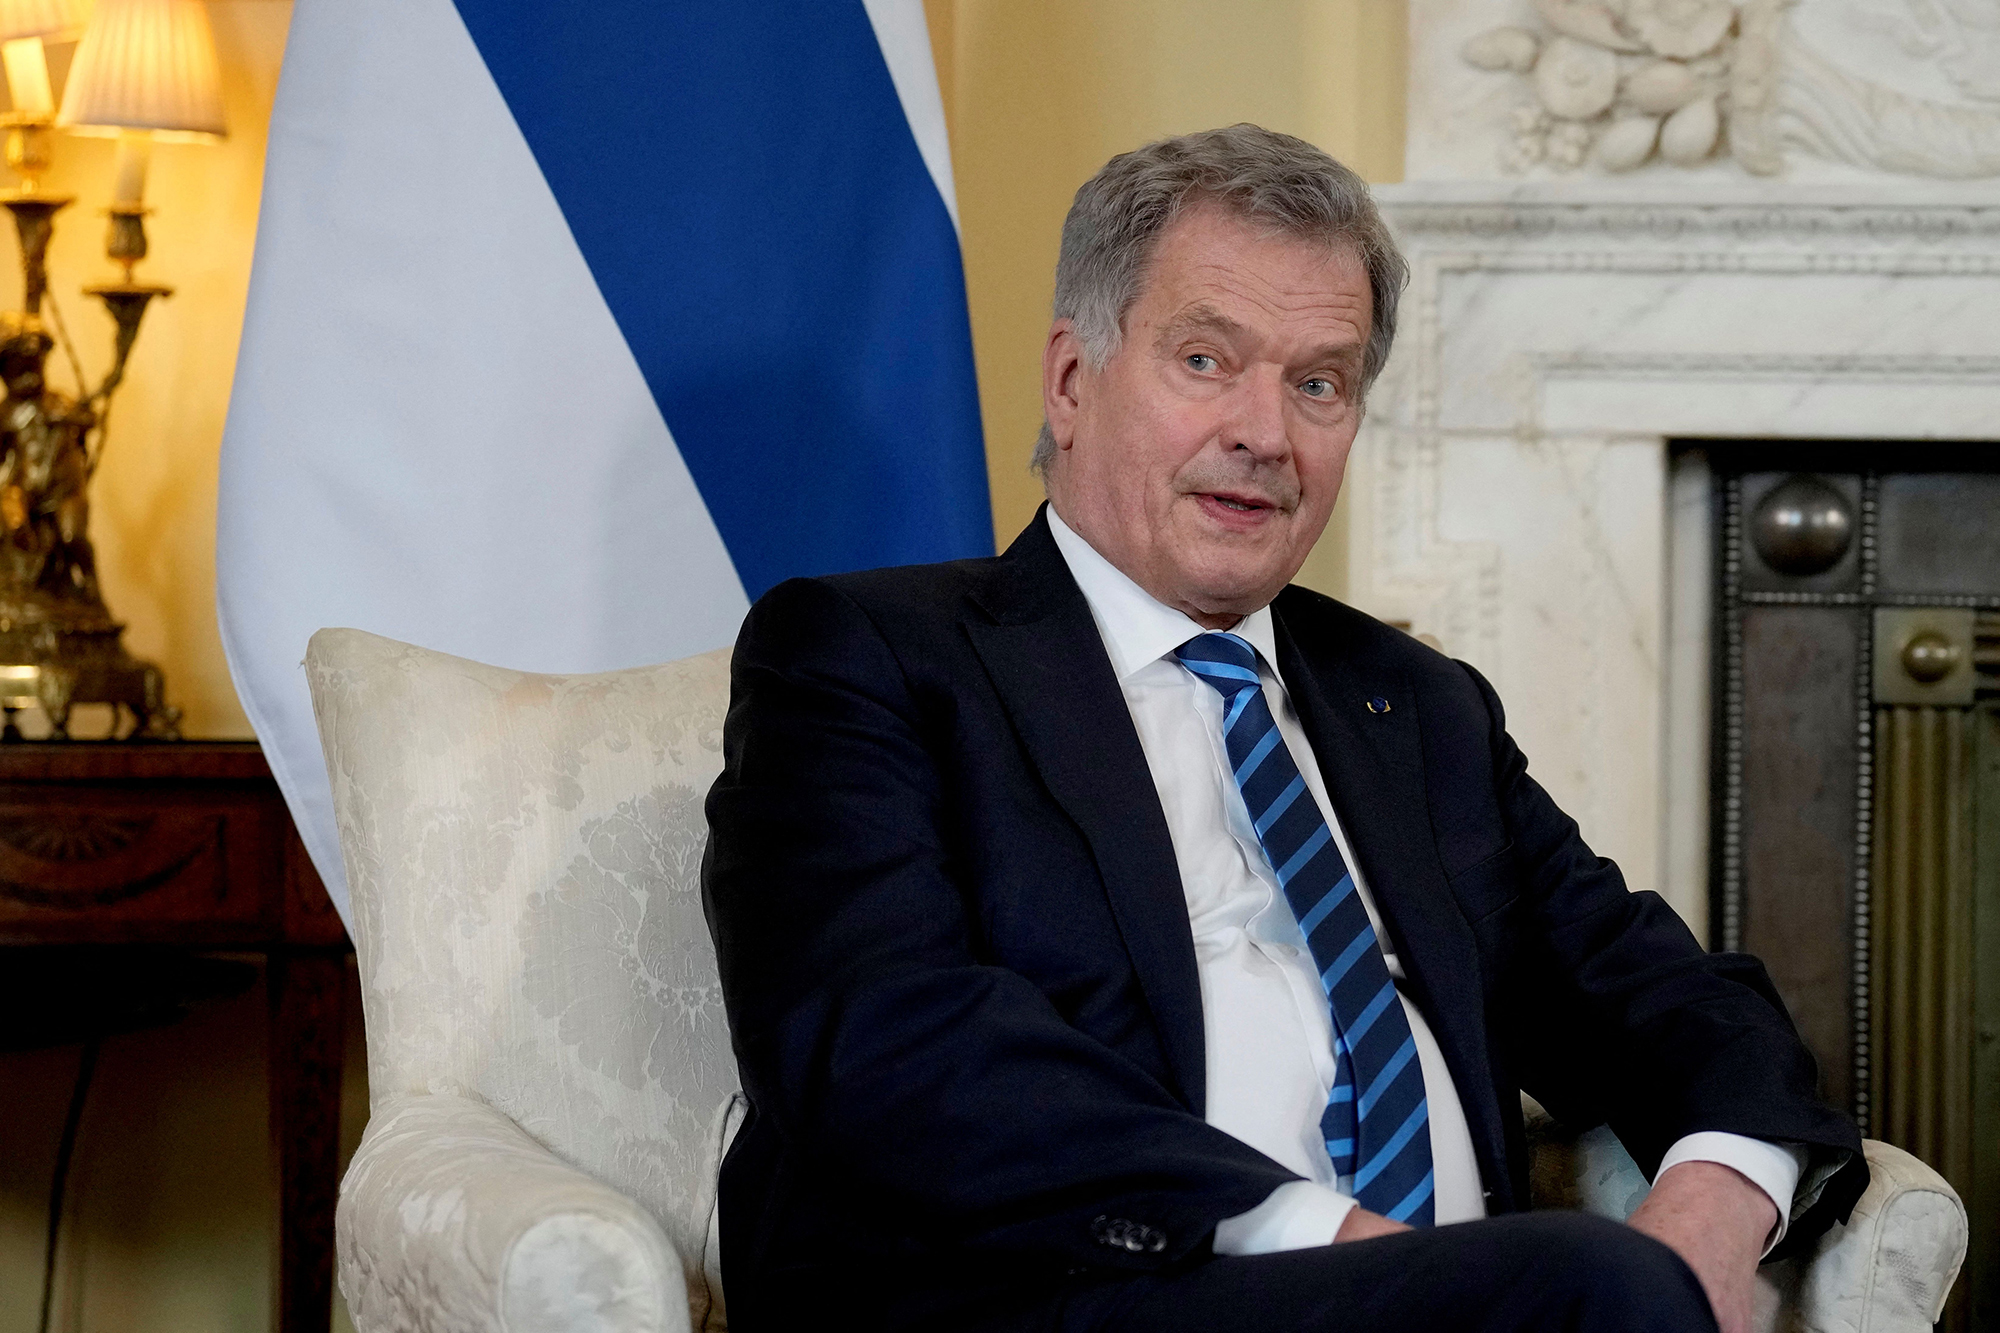 Finland’s President Sauli Niinistö attends a meeting at 10 Downing Street in London on March 15.